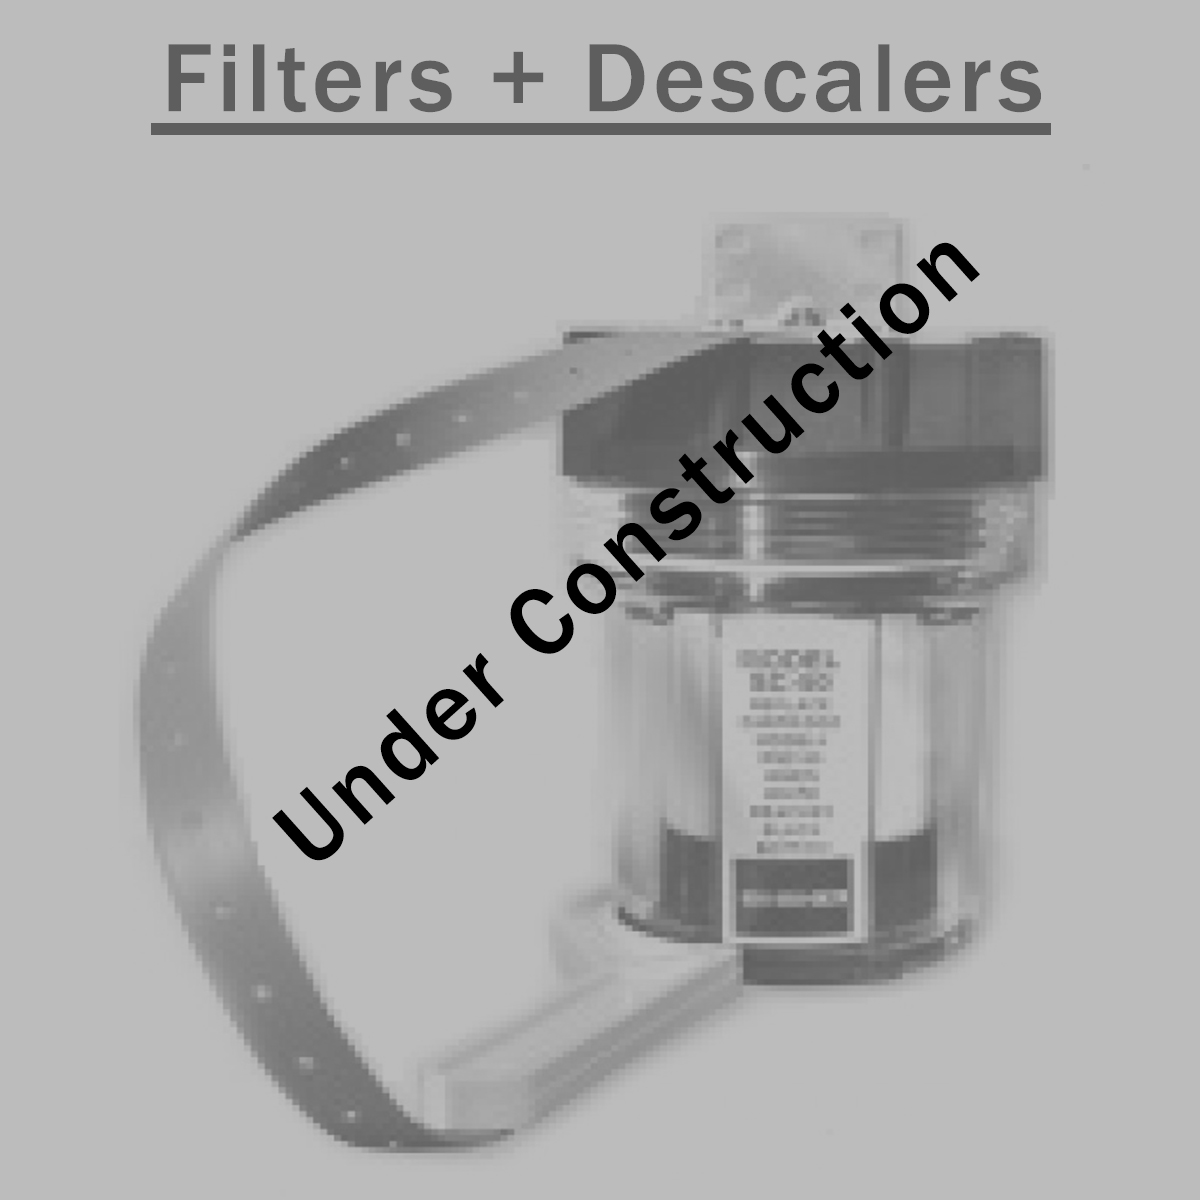 Filters and Descalers